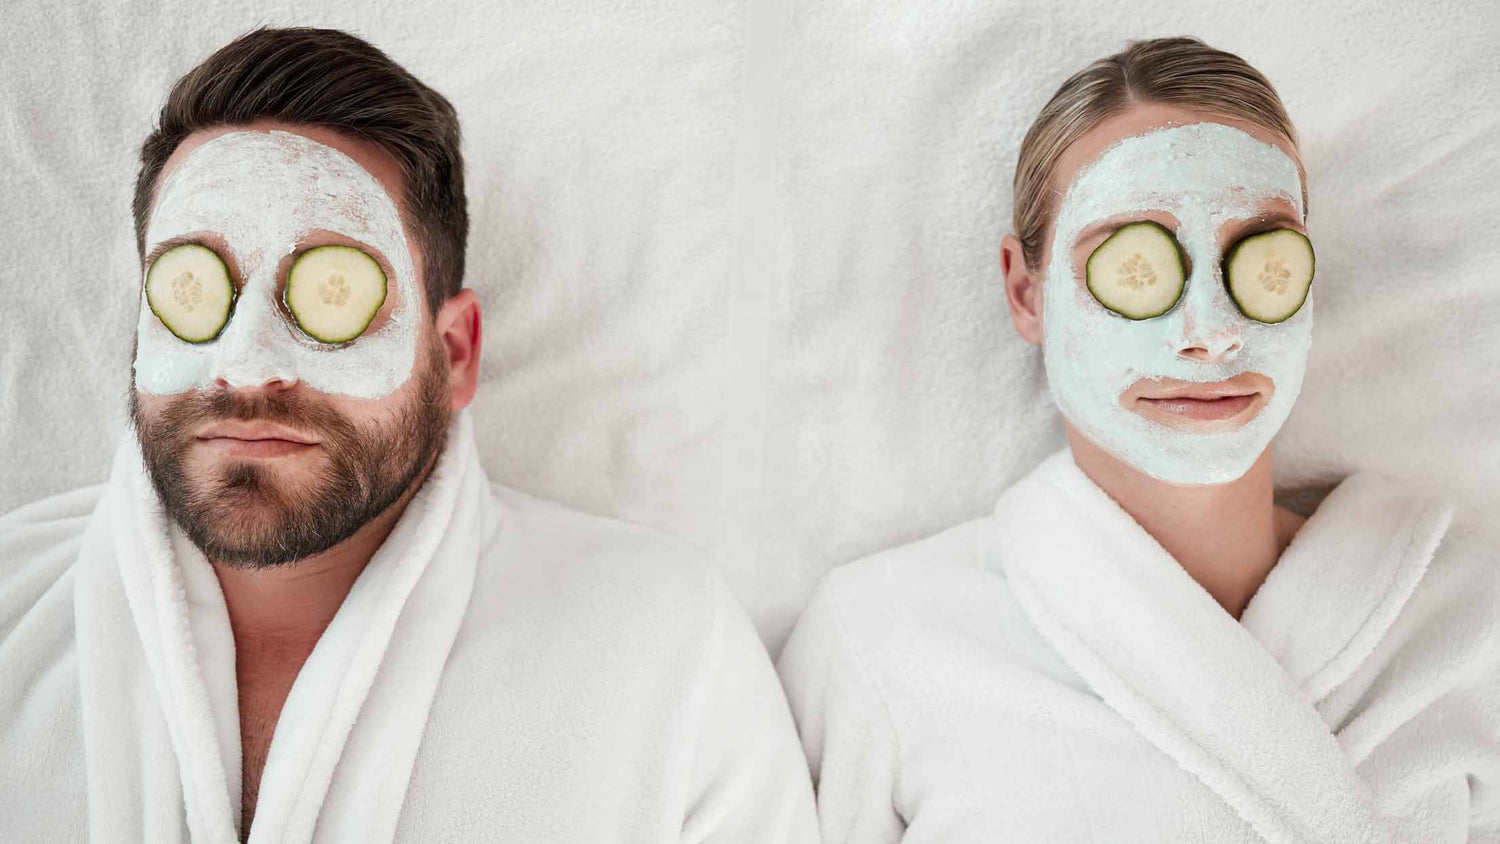 Celebrate Valentine's day with your sweetie by doing an at home facial.